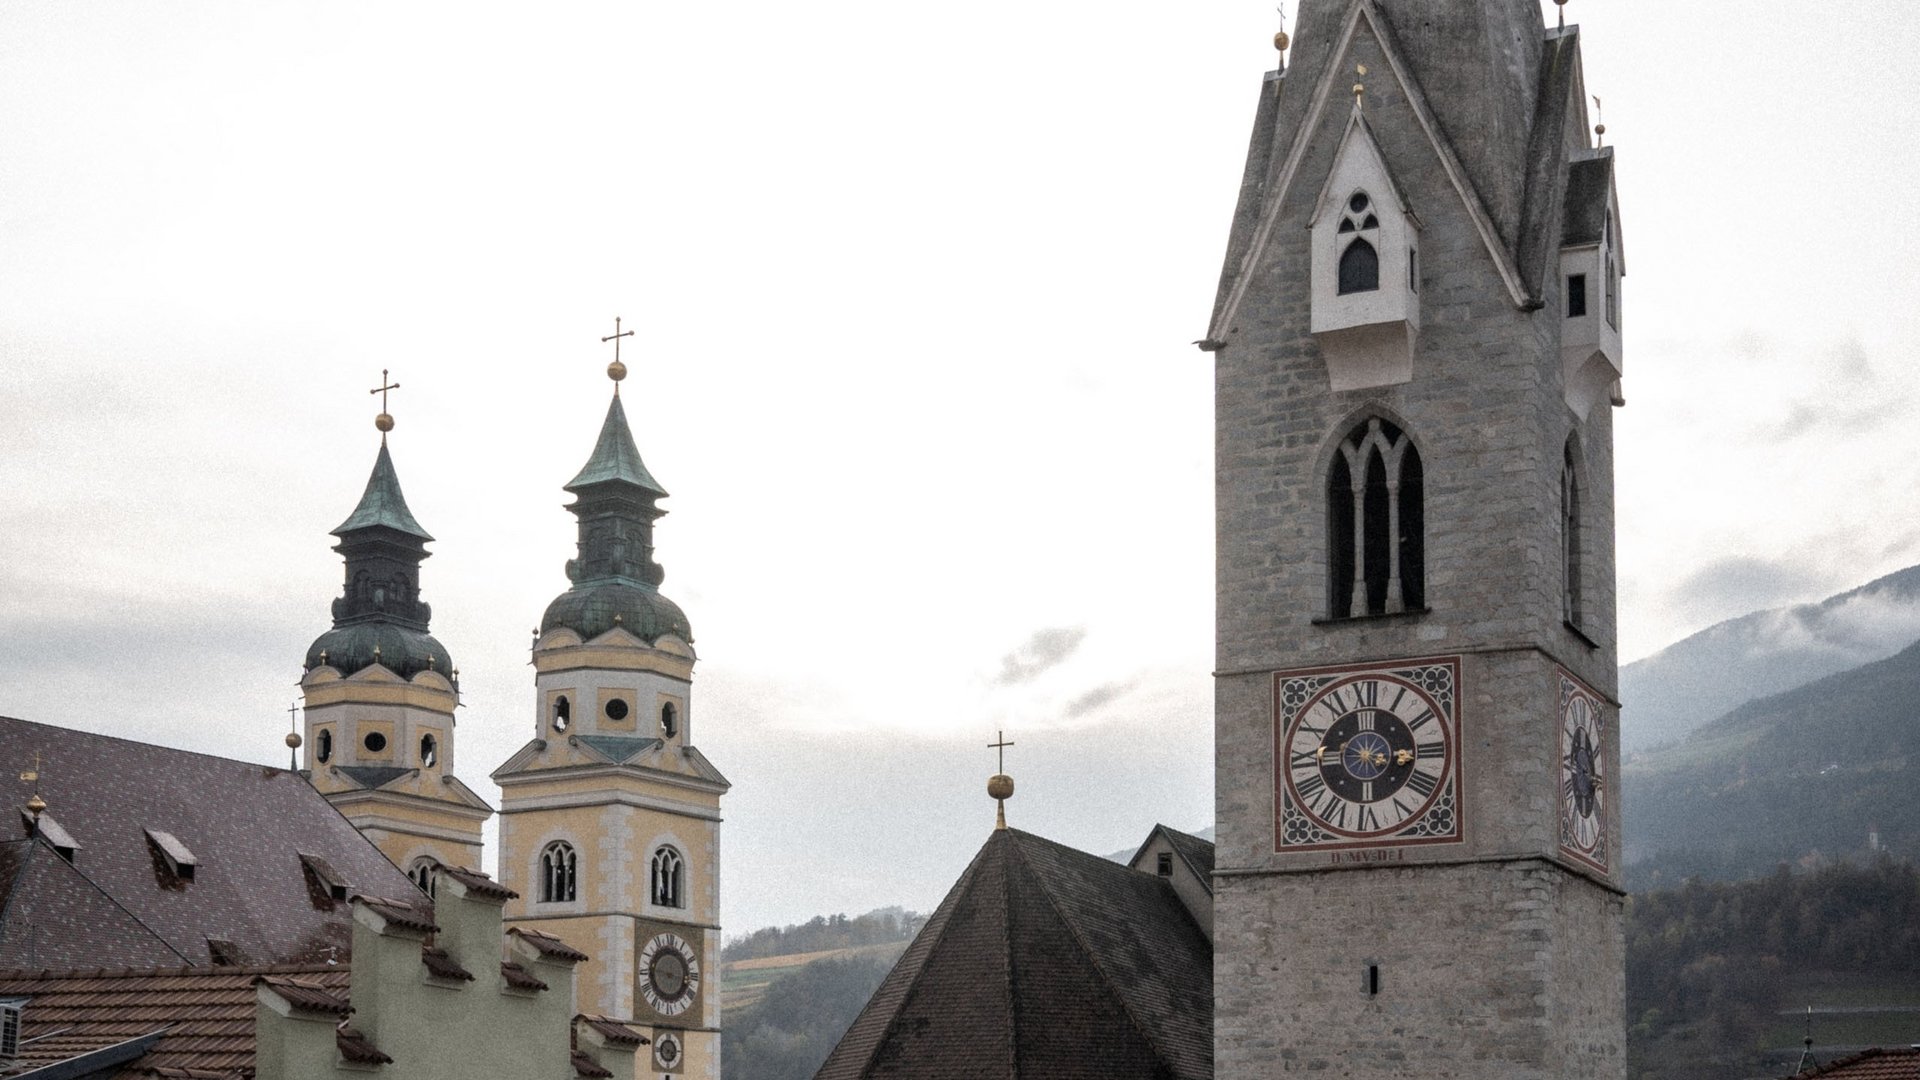 You’ll find these attractions in Brixen, South Tyrol